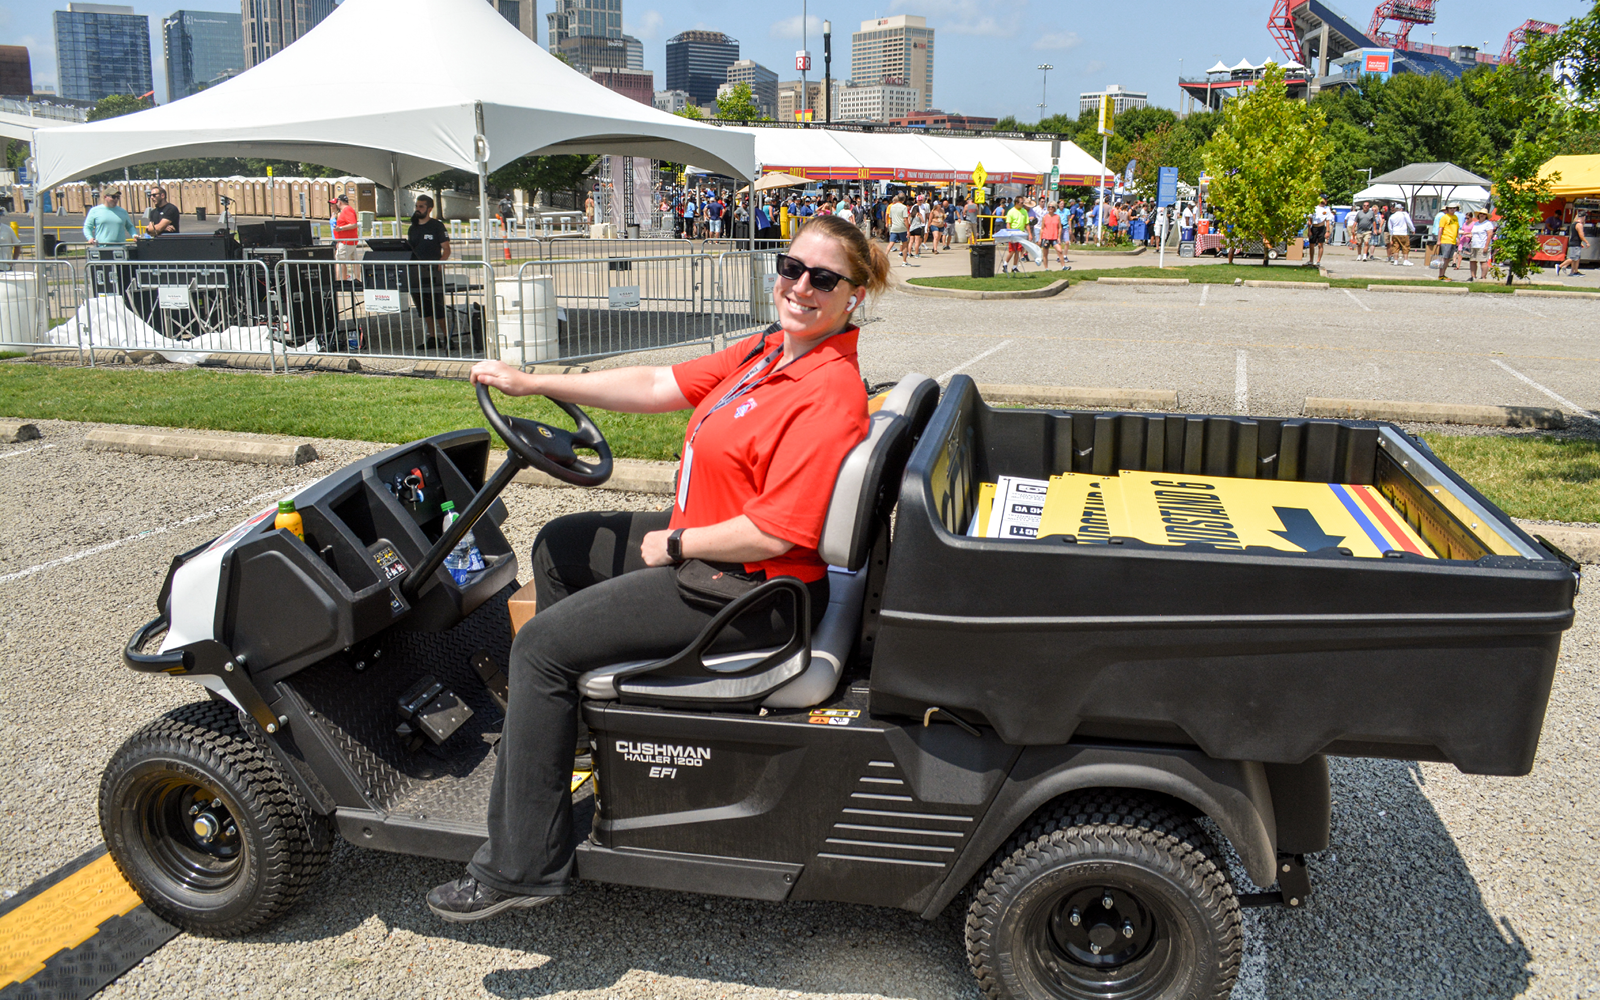 Kristen Moser (manager, event operations) driving wayfinding signage around in a utility cart